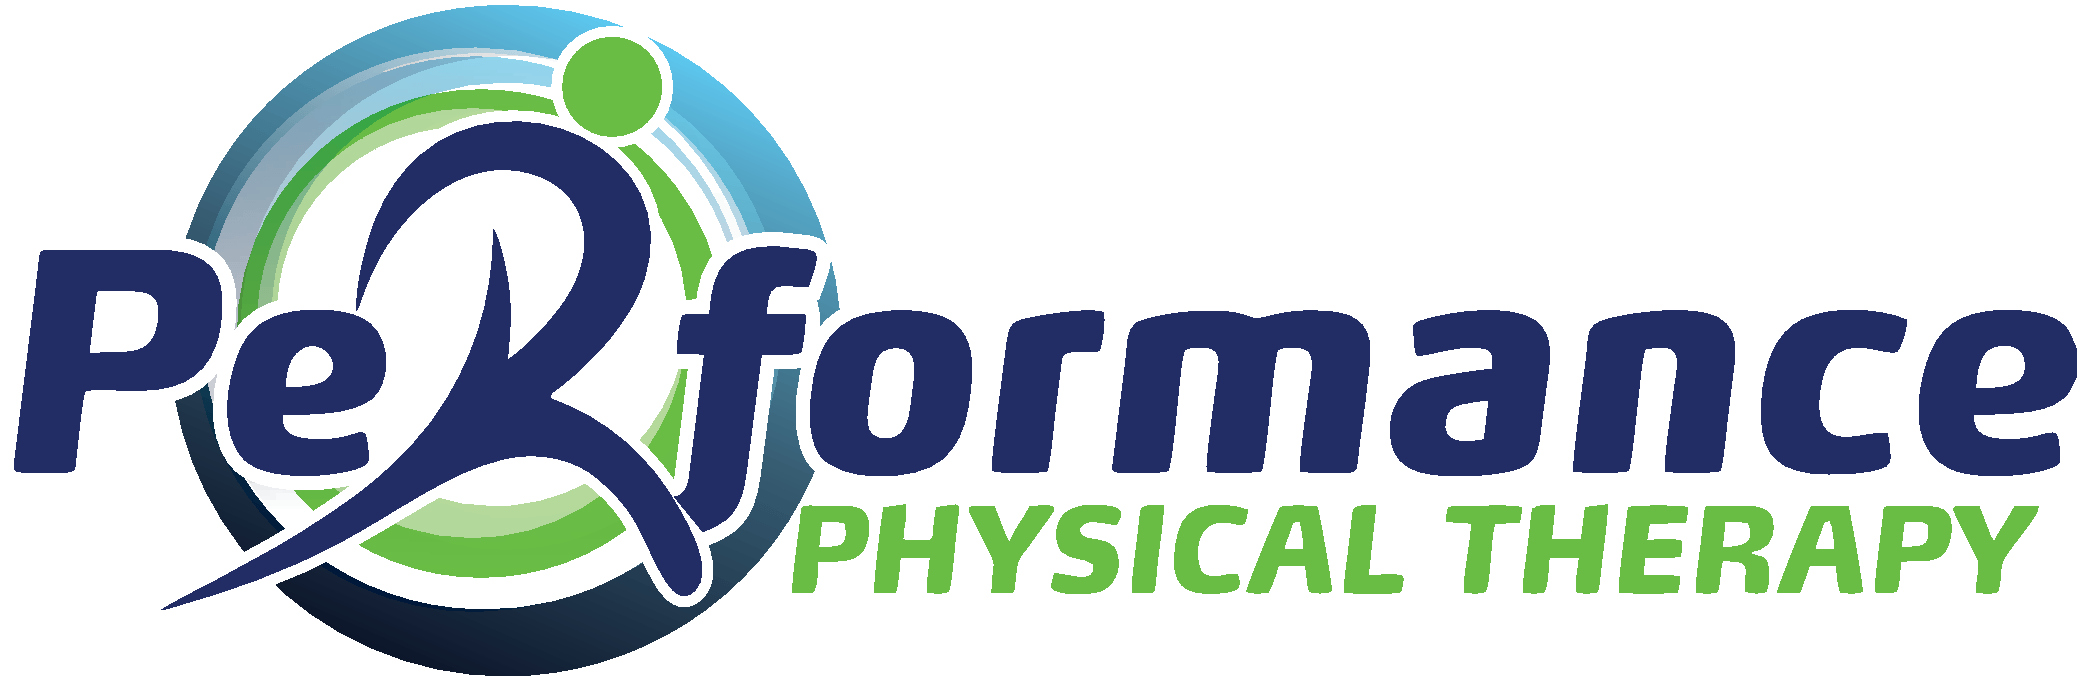 Physical Therapy Logo - Performance Physical Therapy - Performance Physical Therapy